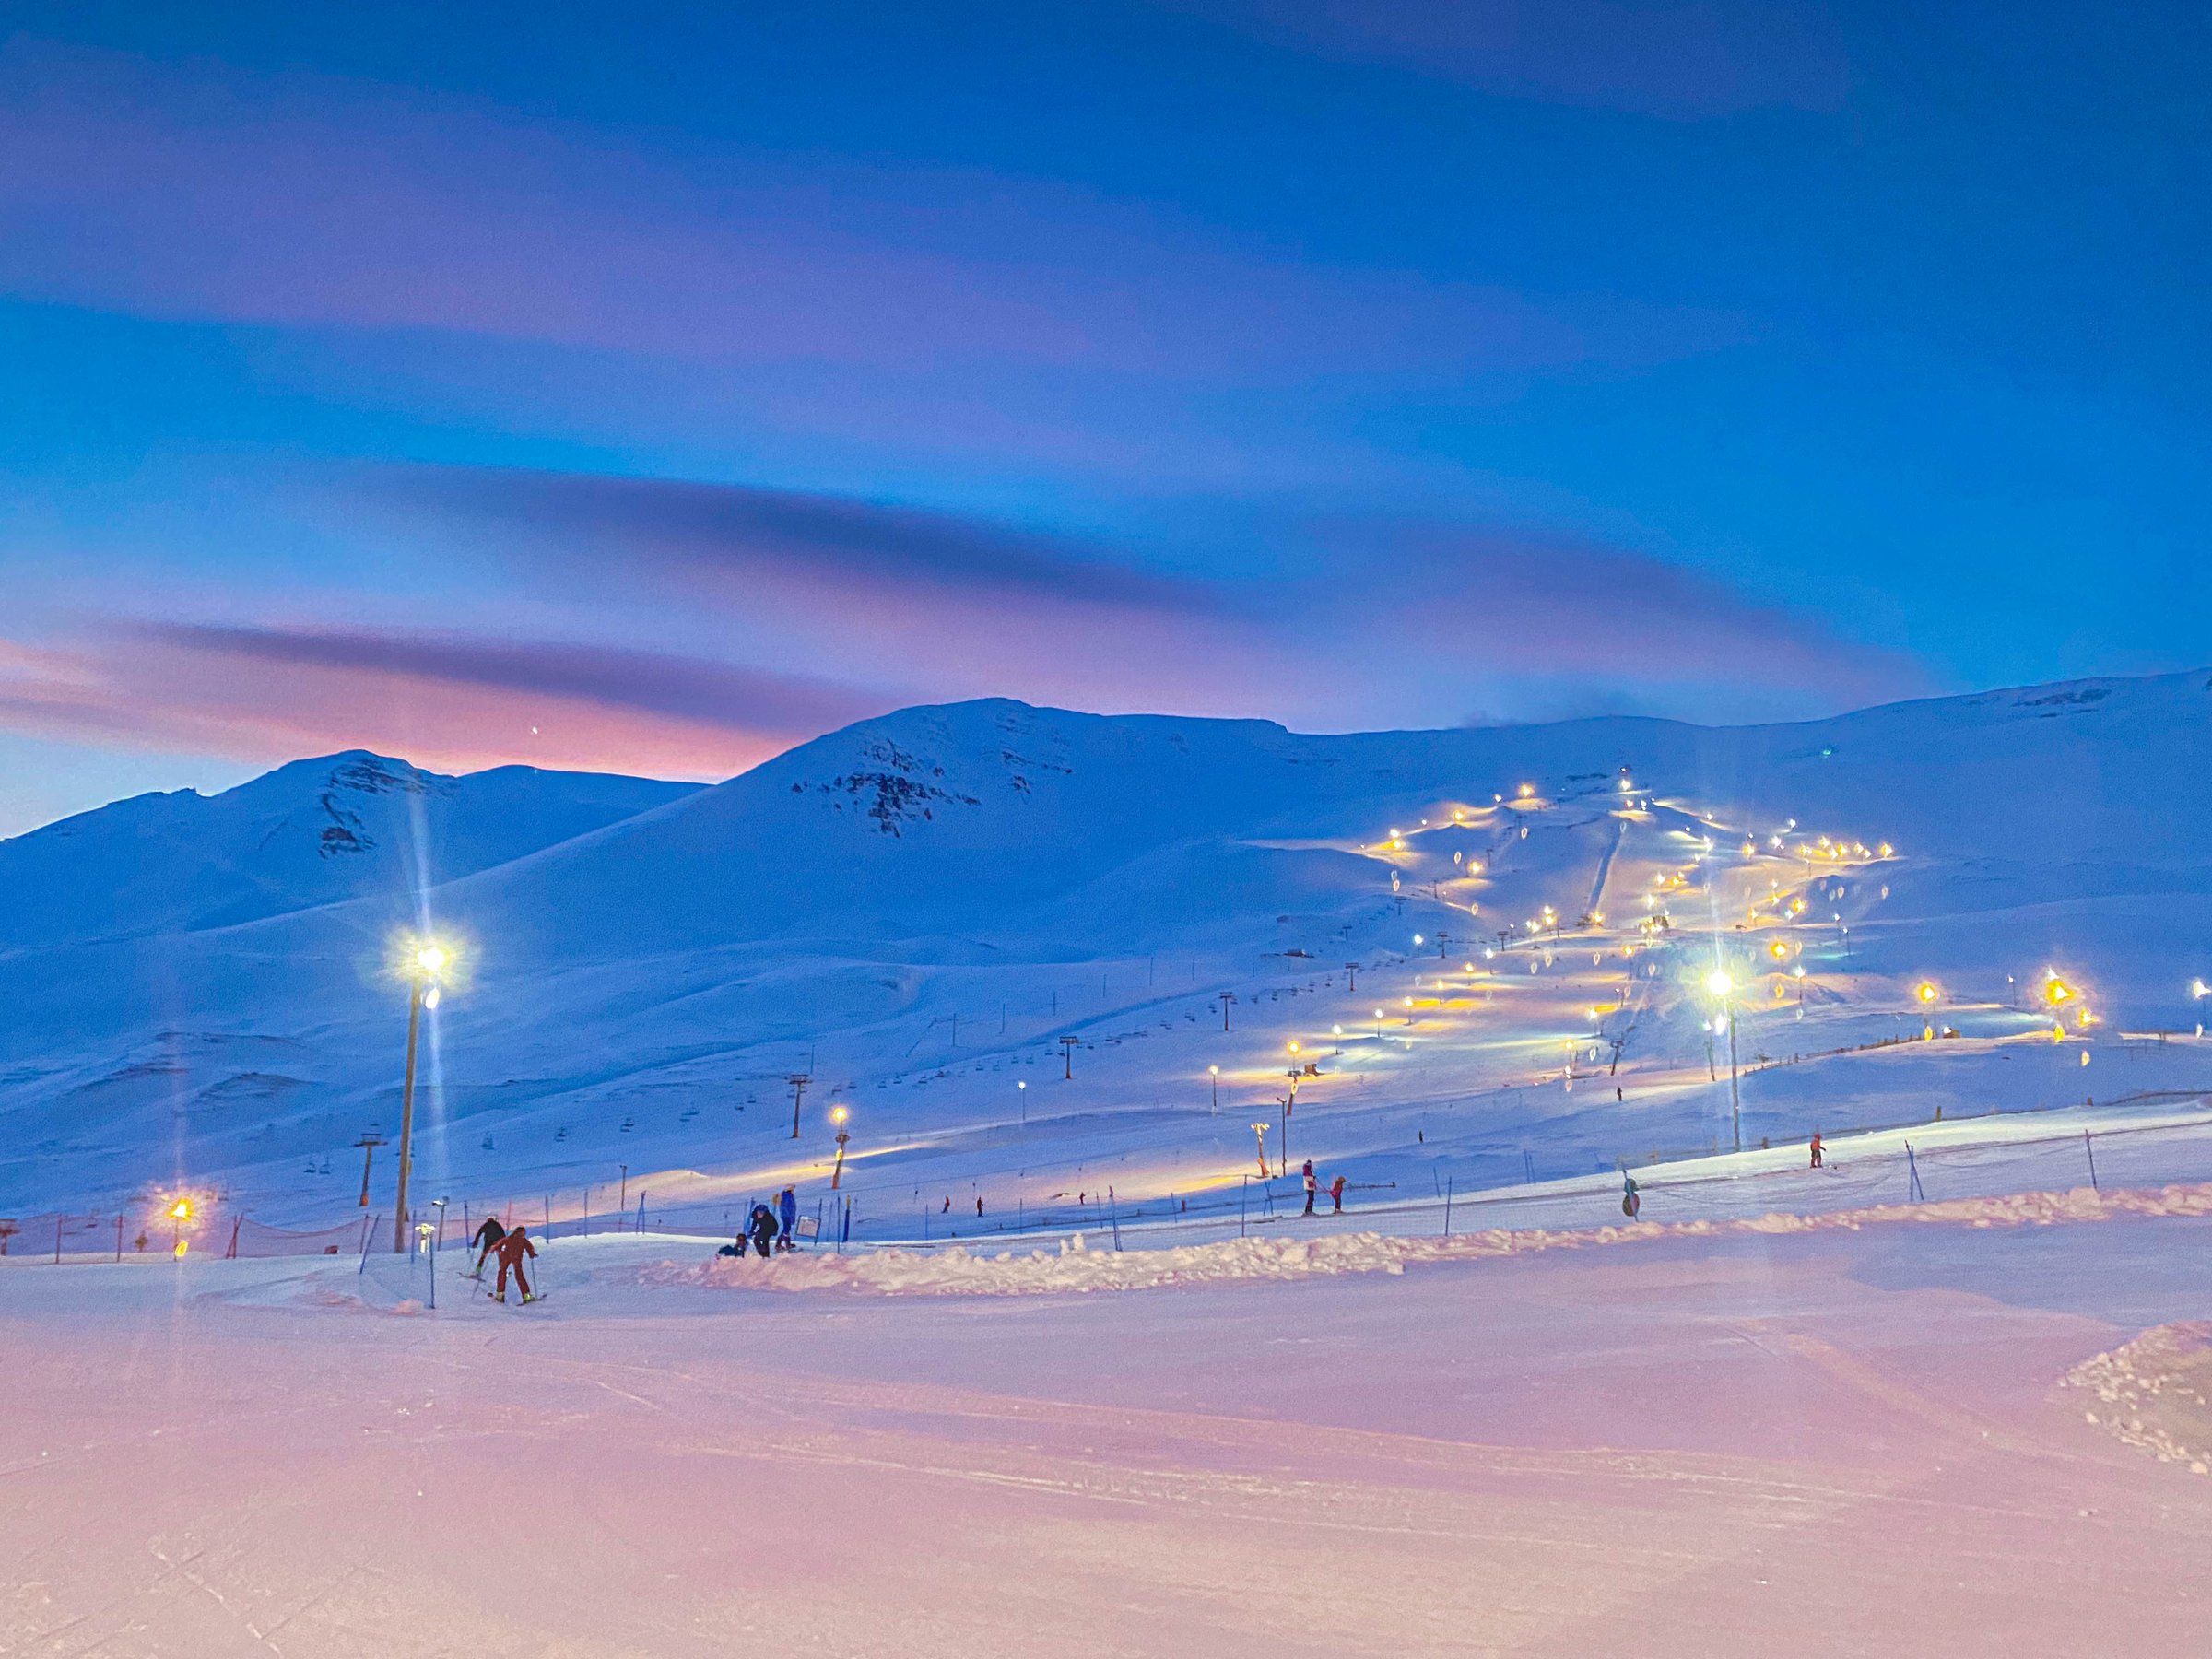 Twilight view of skiers and floodlit ski runs covered in snow